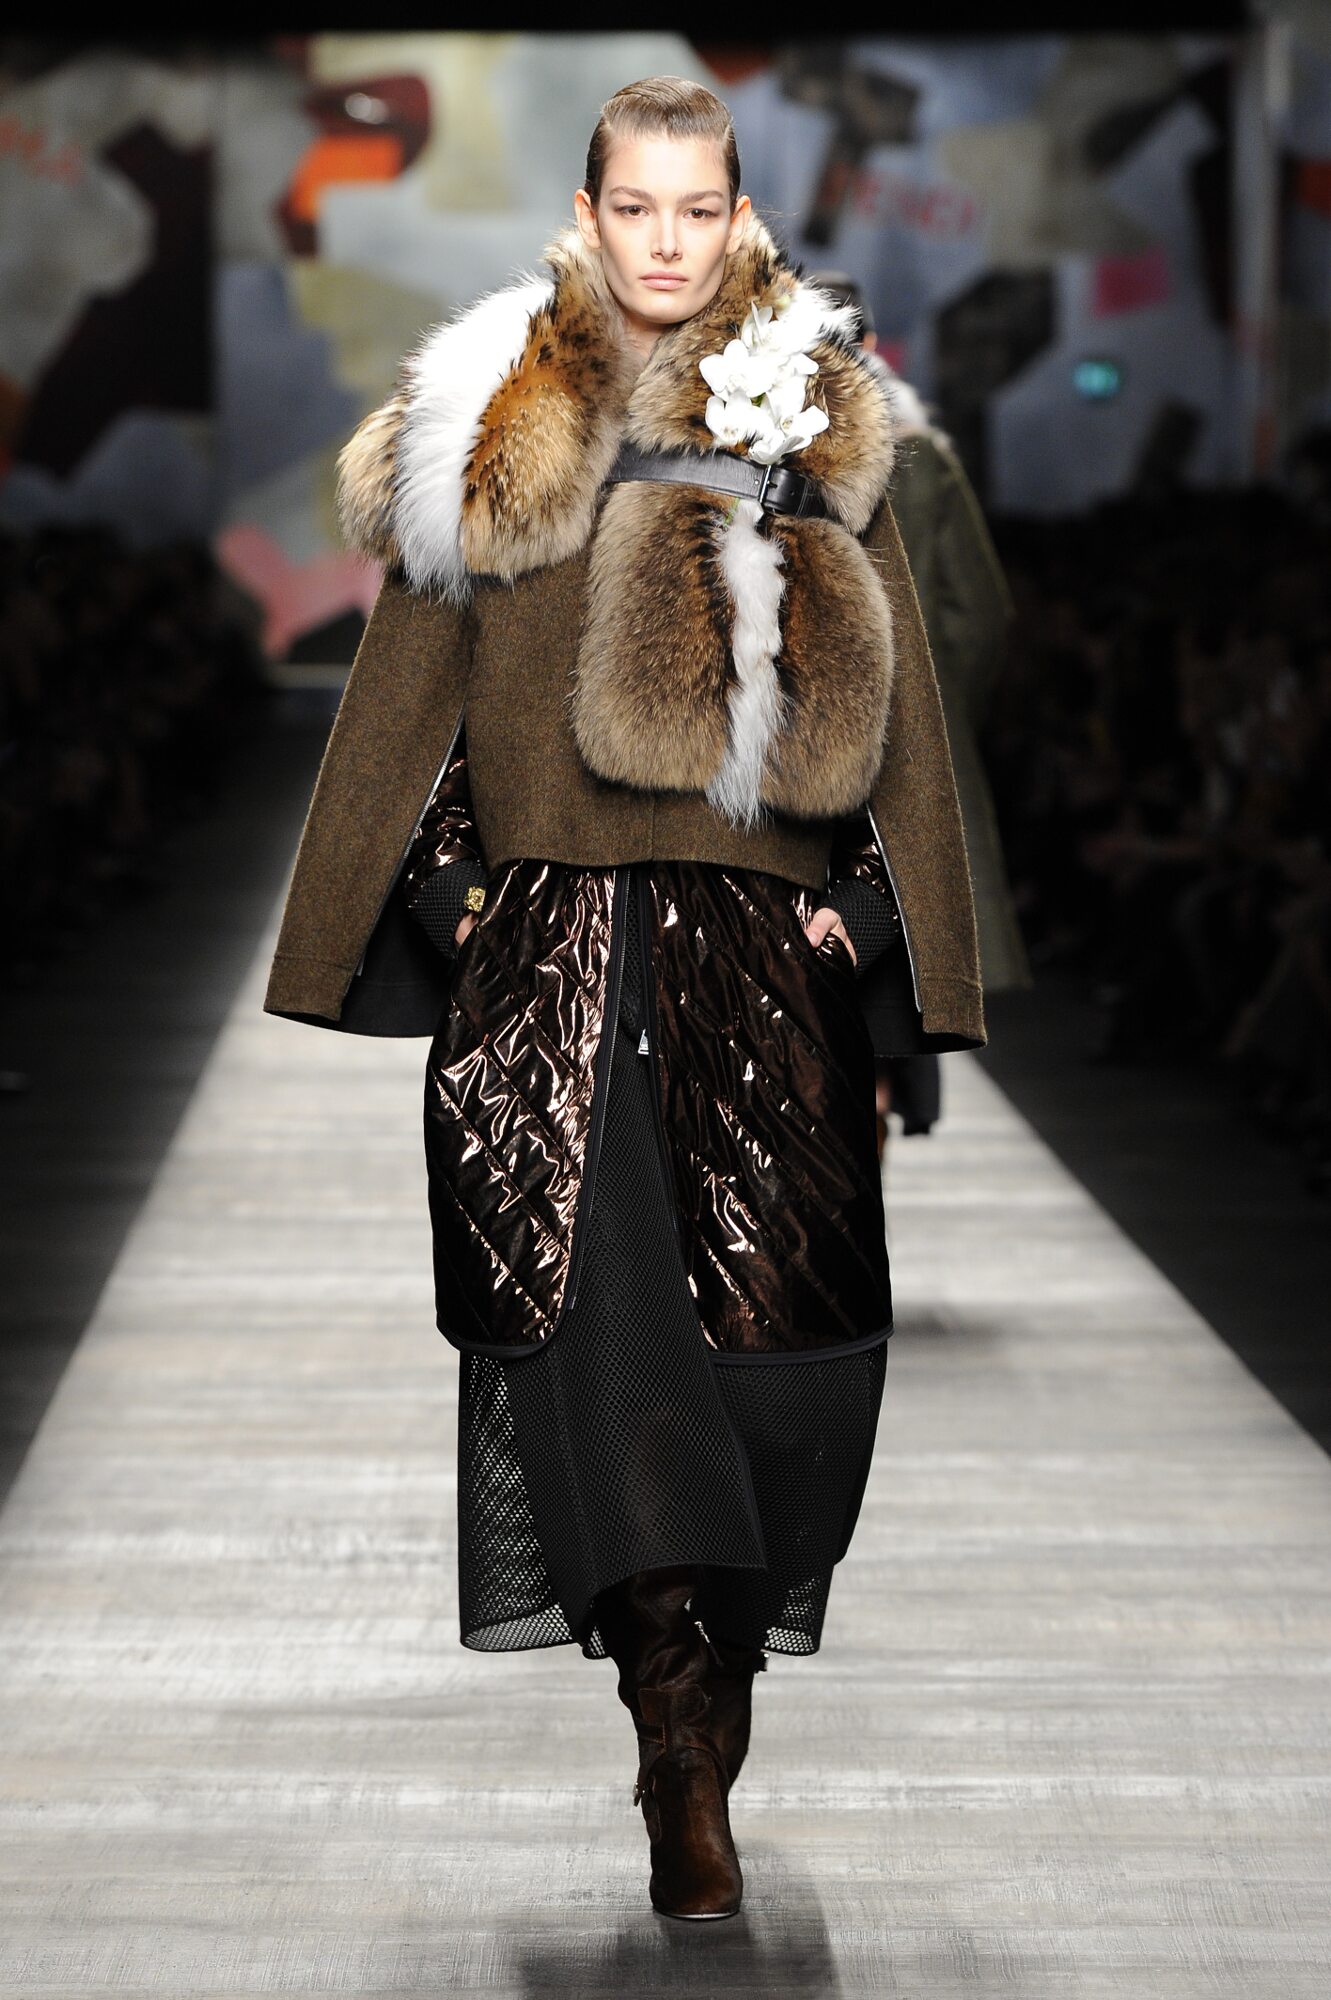 FENDI FALL WINTER 2014-15 WOMEN’S COLLECTION | The Skinny Beep